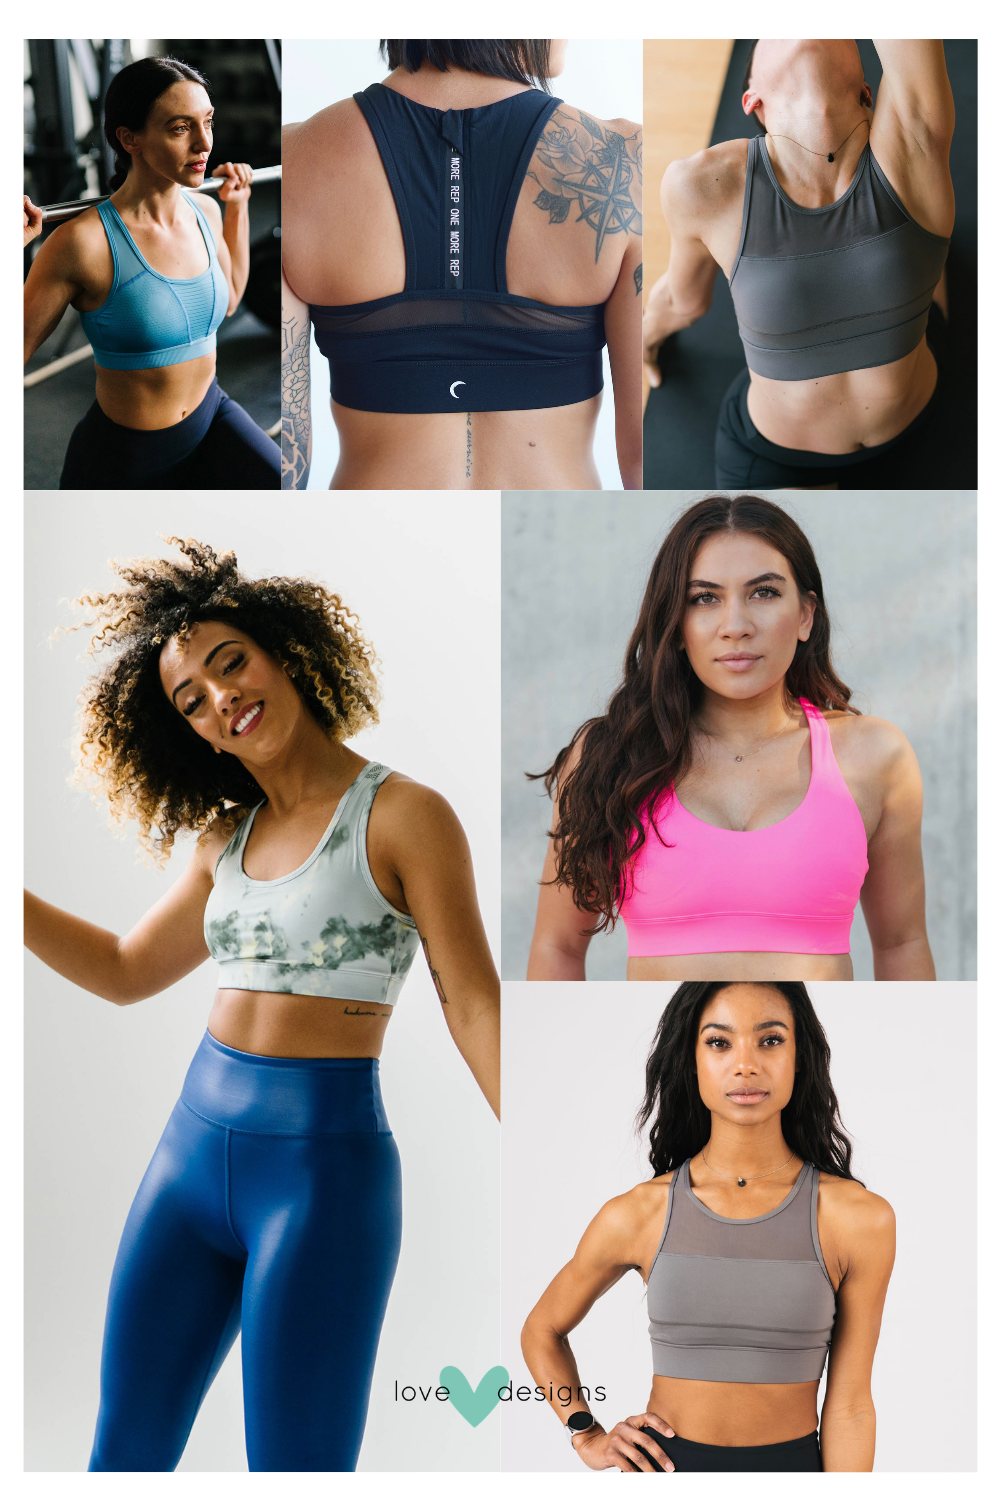 Riza World - Riza Sports is the most ideal bra to start your